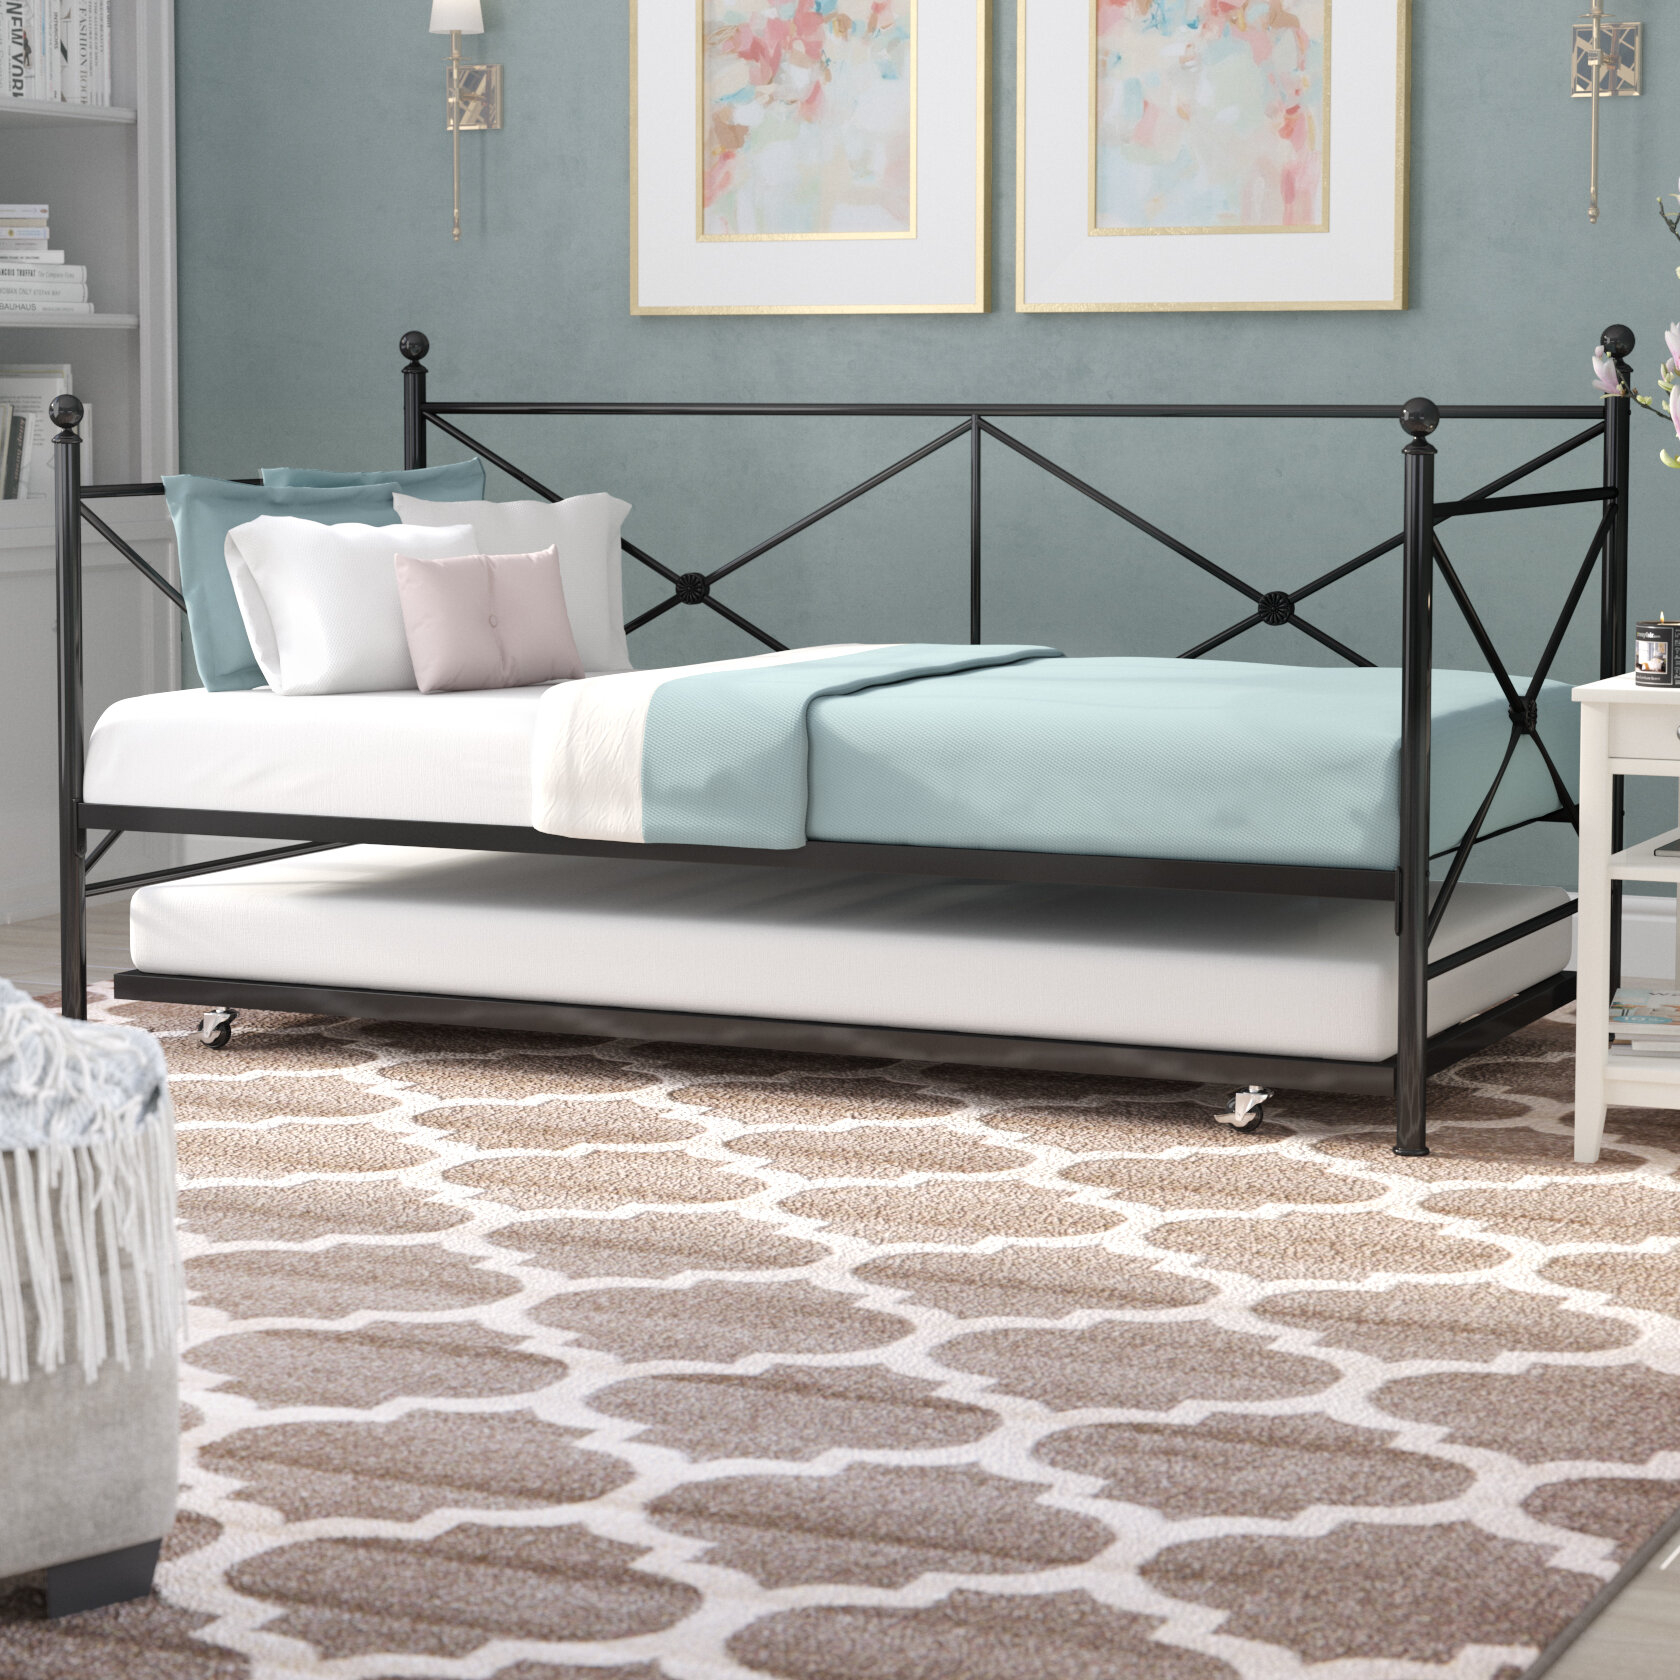 Daybed With Pop Up Trundle Visualhunt, Wayfair Twin Beds With Trundle Bed